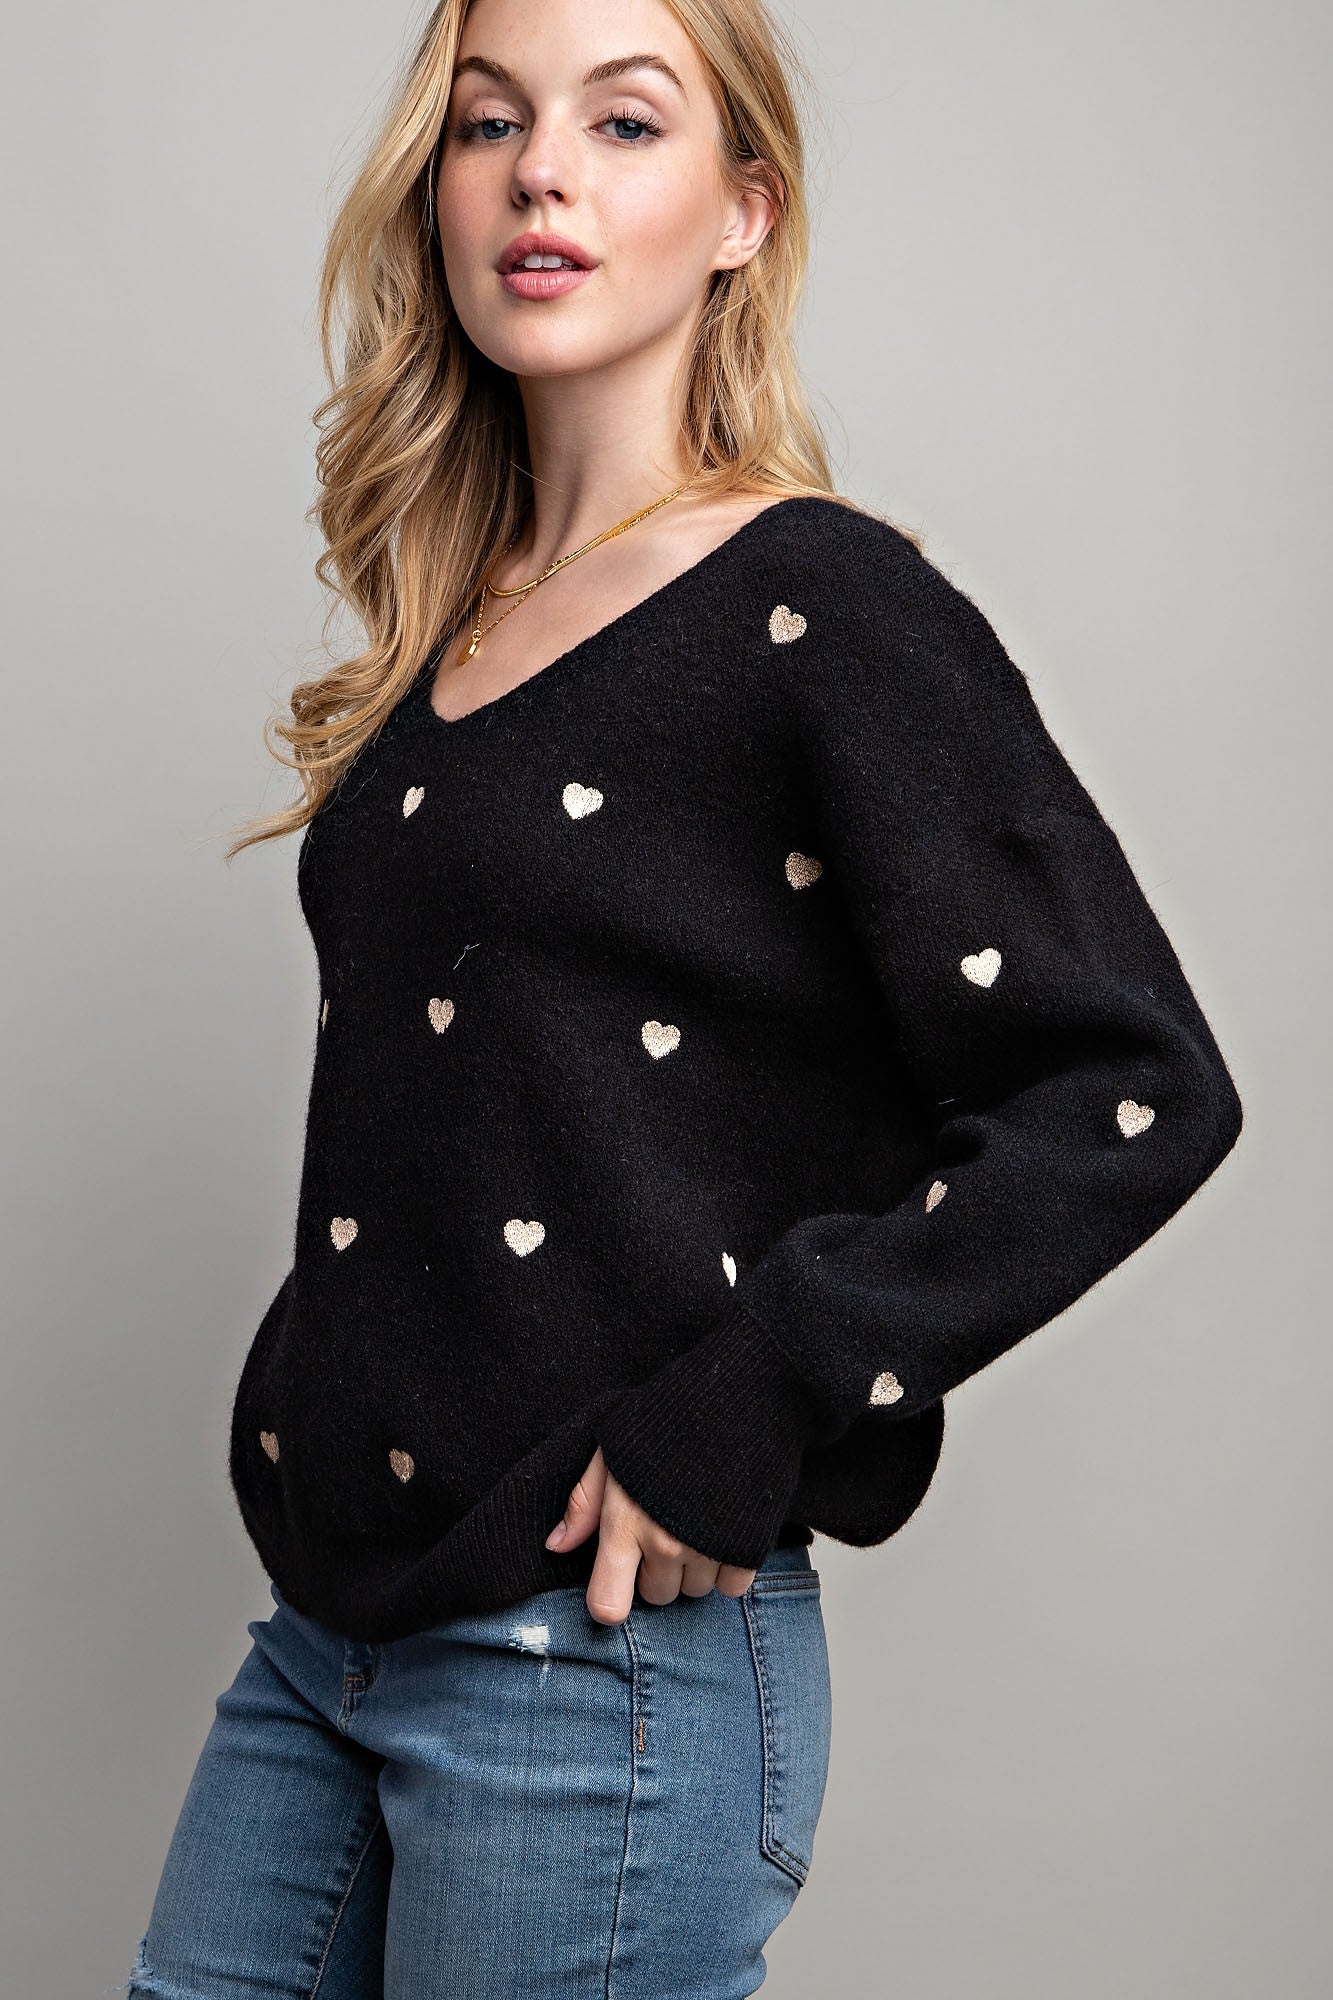 EMBROIDERED HEART BOXY SWEATER / Black